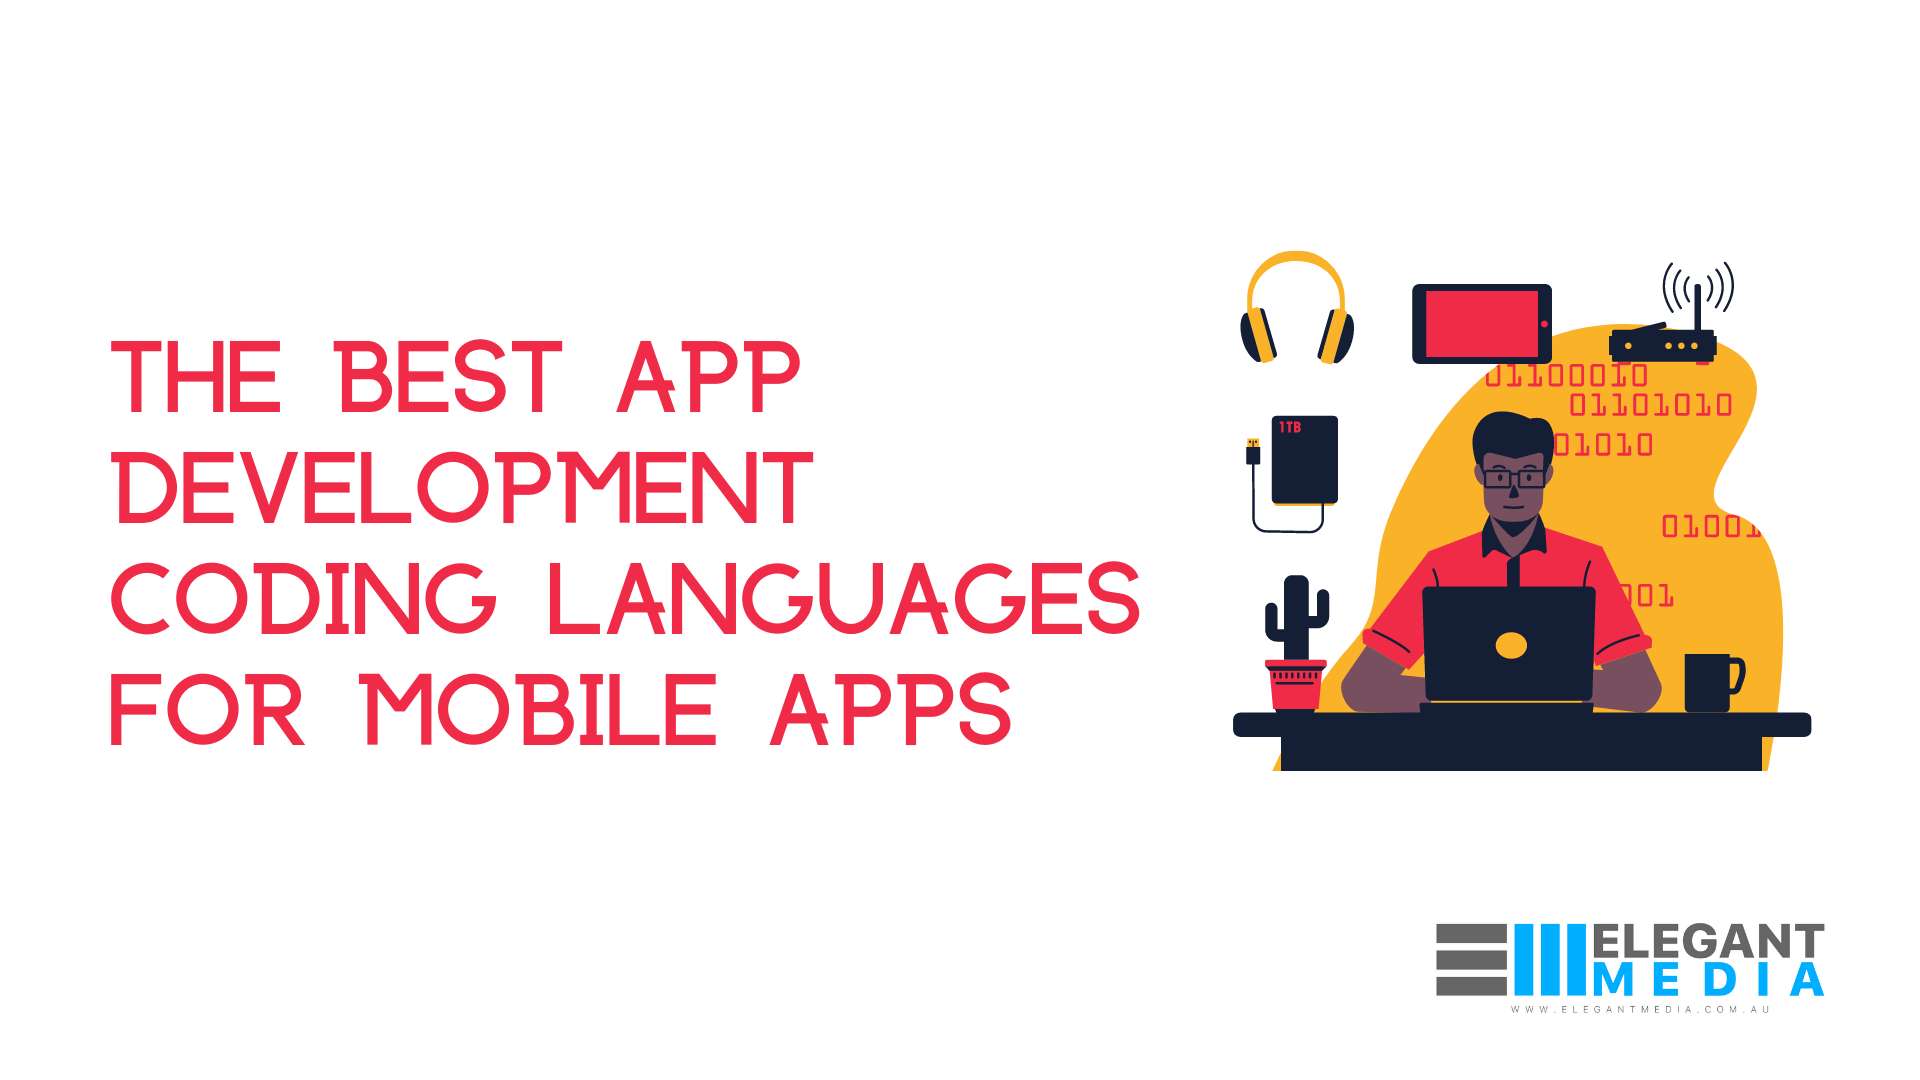 The Best App Development Coding Languages For Mobile Apps